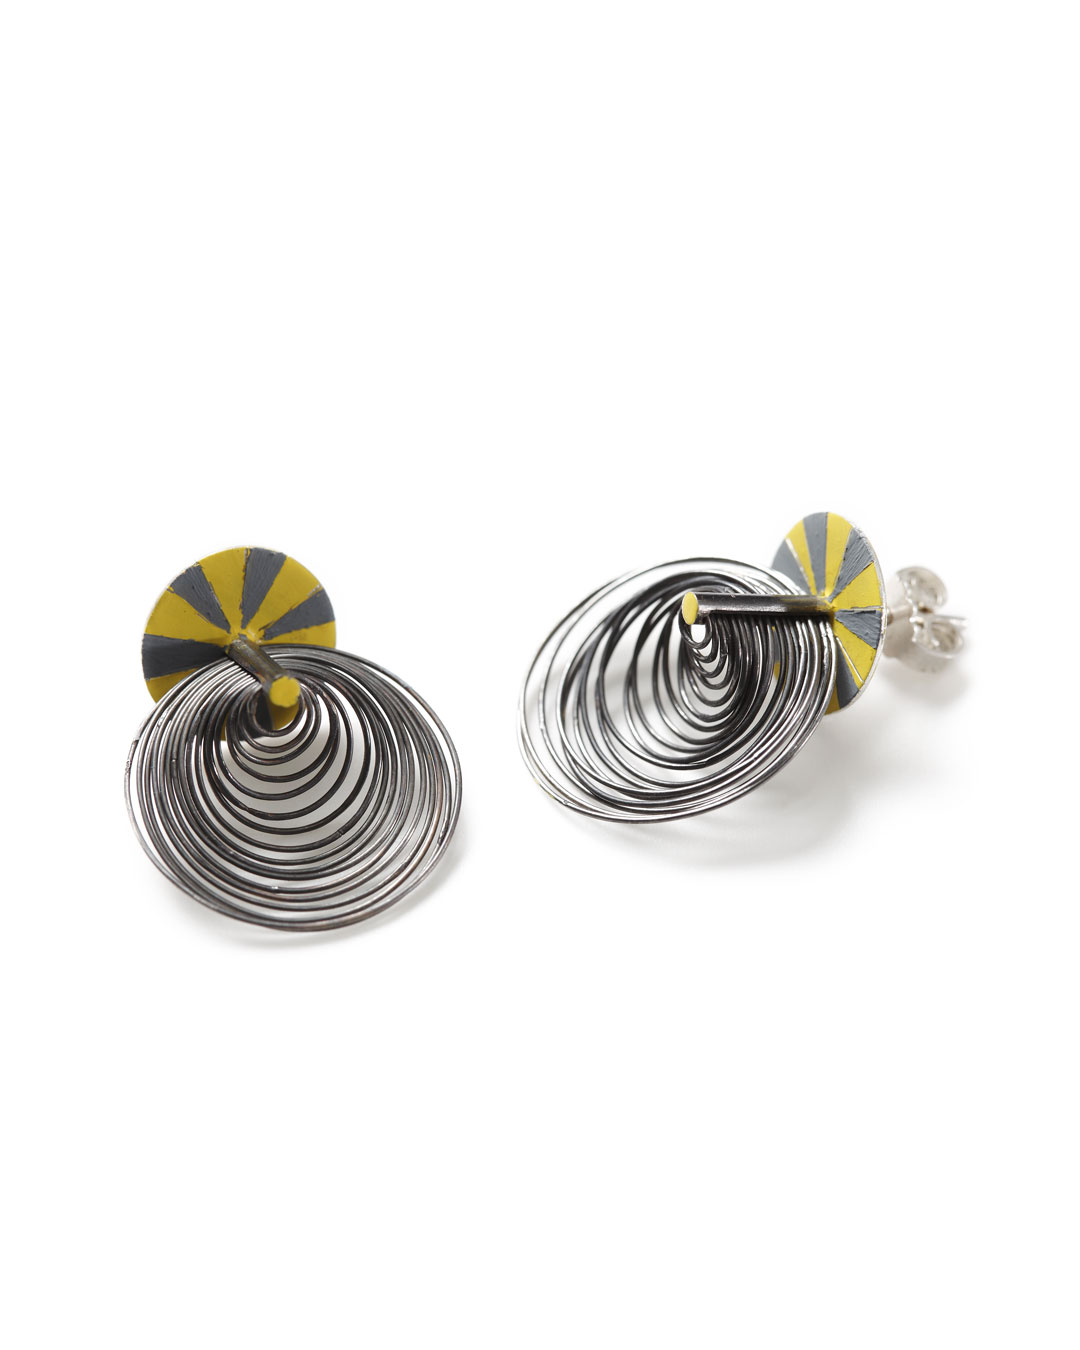 Julie Mollenhauer, untitled, 2012, earrings; silver, lacquer, 25 x 20 x 11 mm, €1000